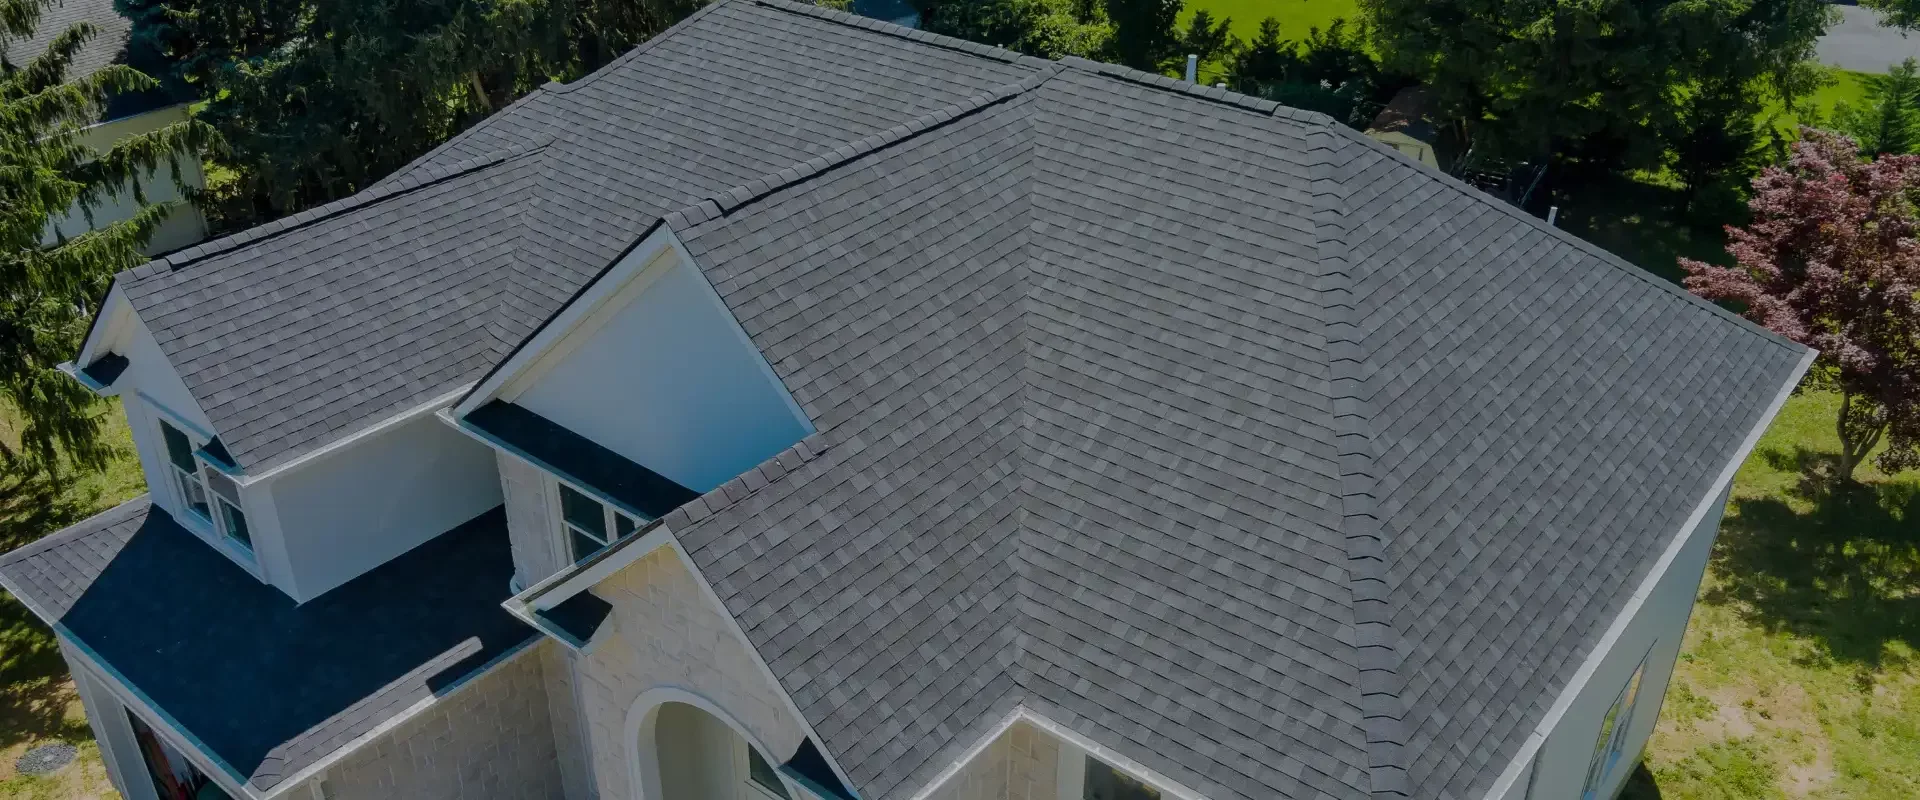 hero aerial view of a large house with an asphalt shingle roof